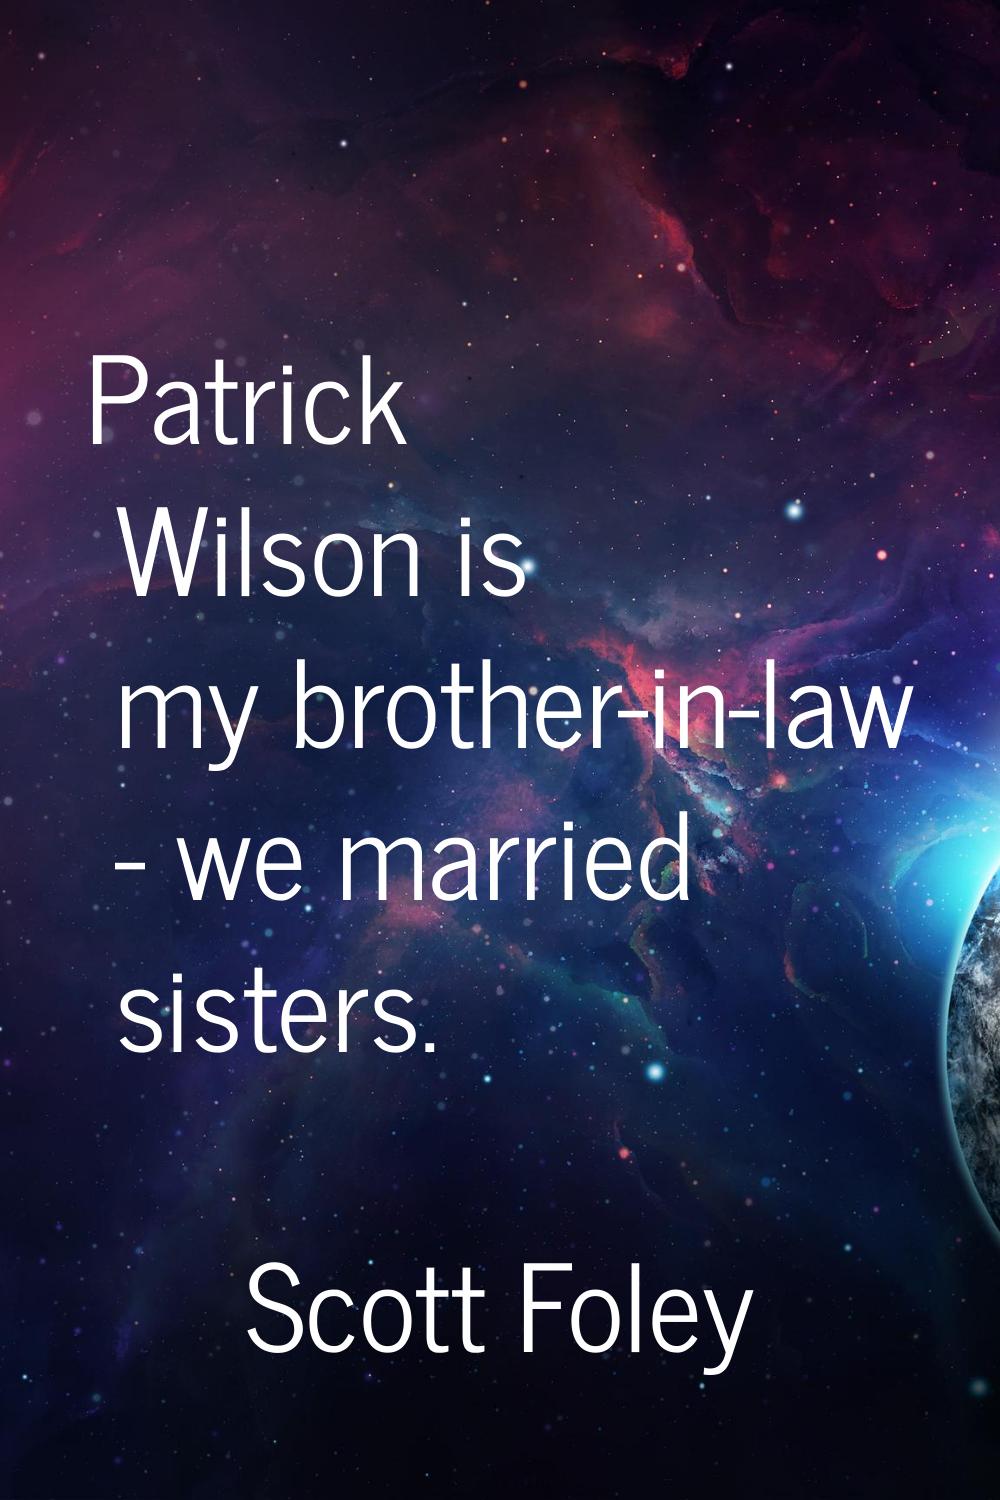 Patrick Wilson is my brother-in-law - we married sisters.